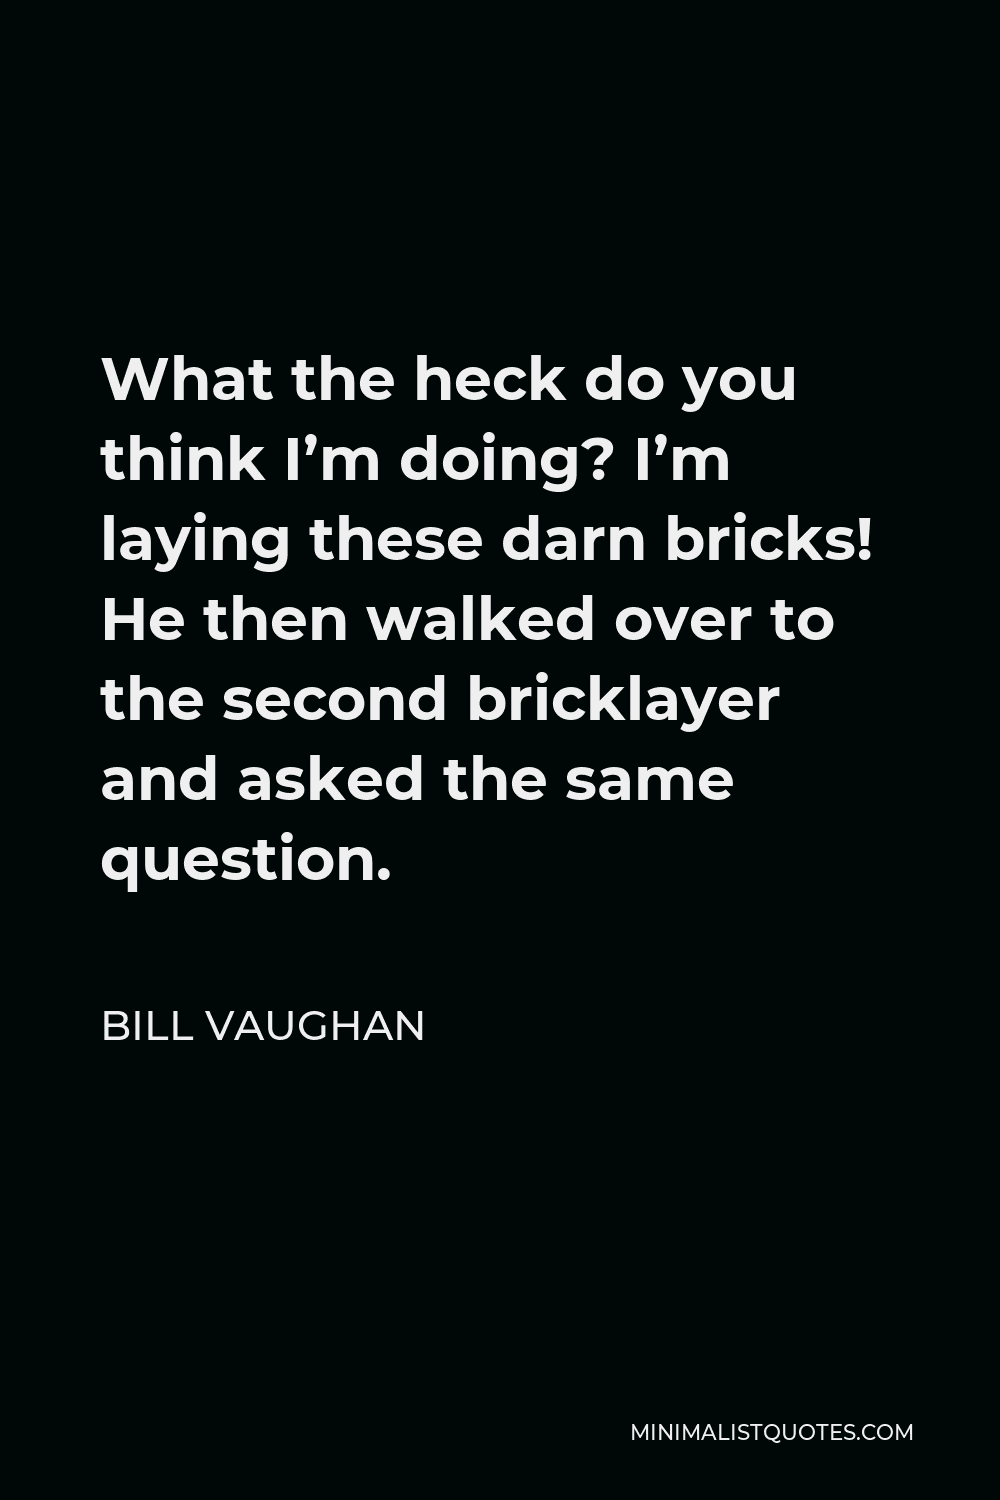 Bill Vaughan Quote - What the heck do you think I’m doing? I’m laying these darn bricks! He then walked over to the second bricklayer and asked the same question.